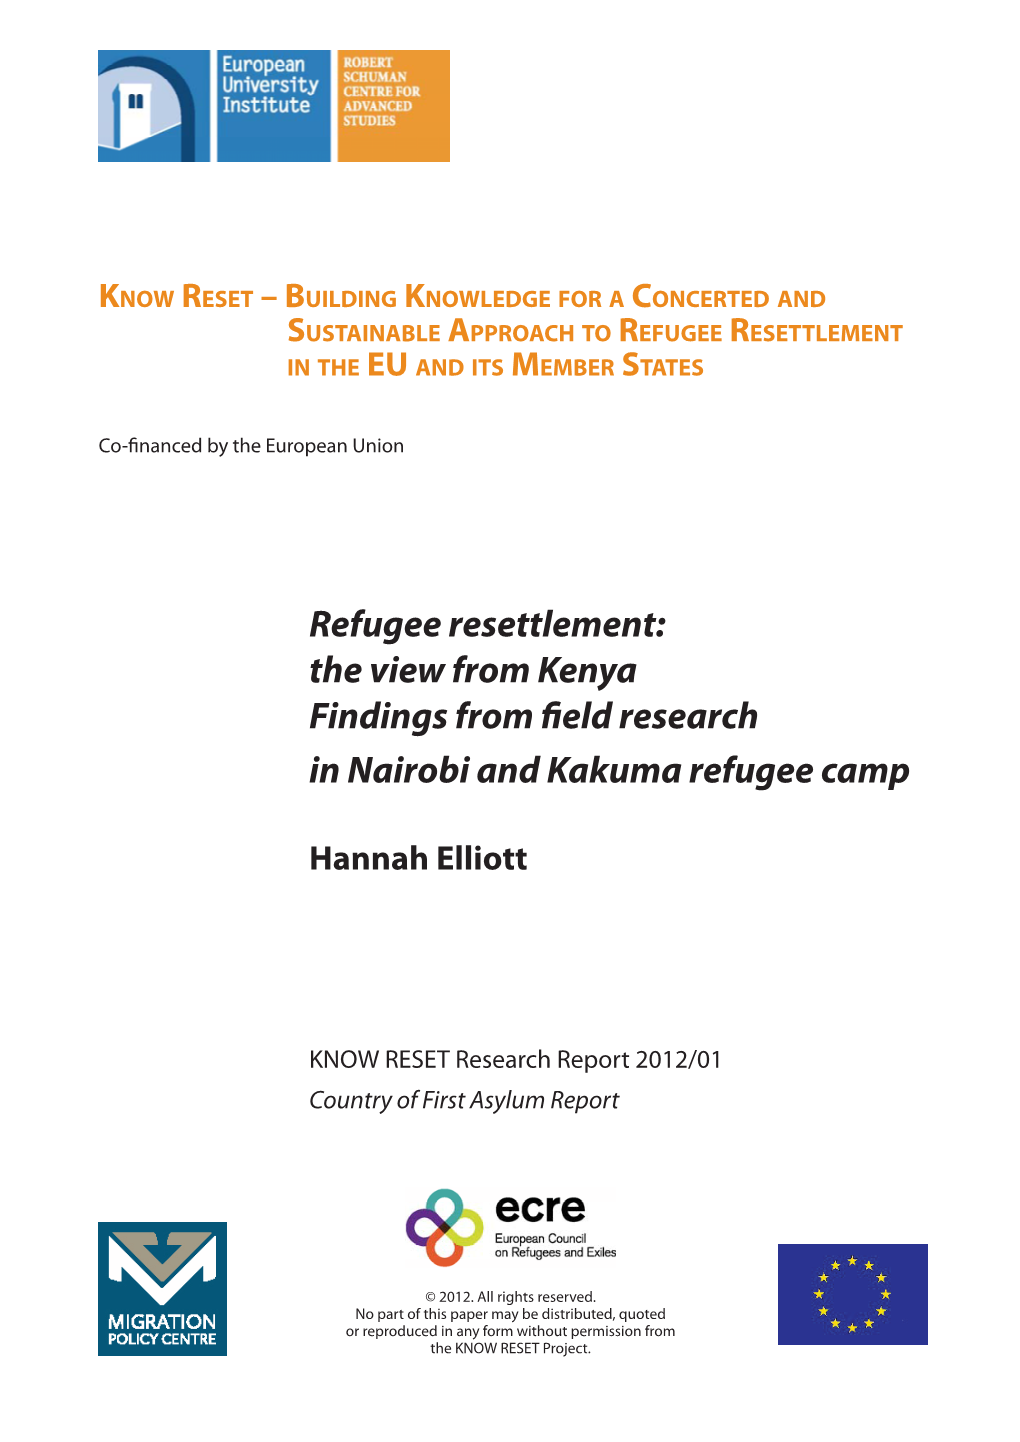 Refugee Resettlement in the Eu and Its Member States